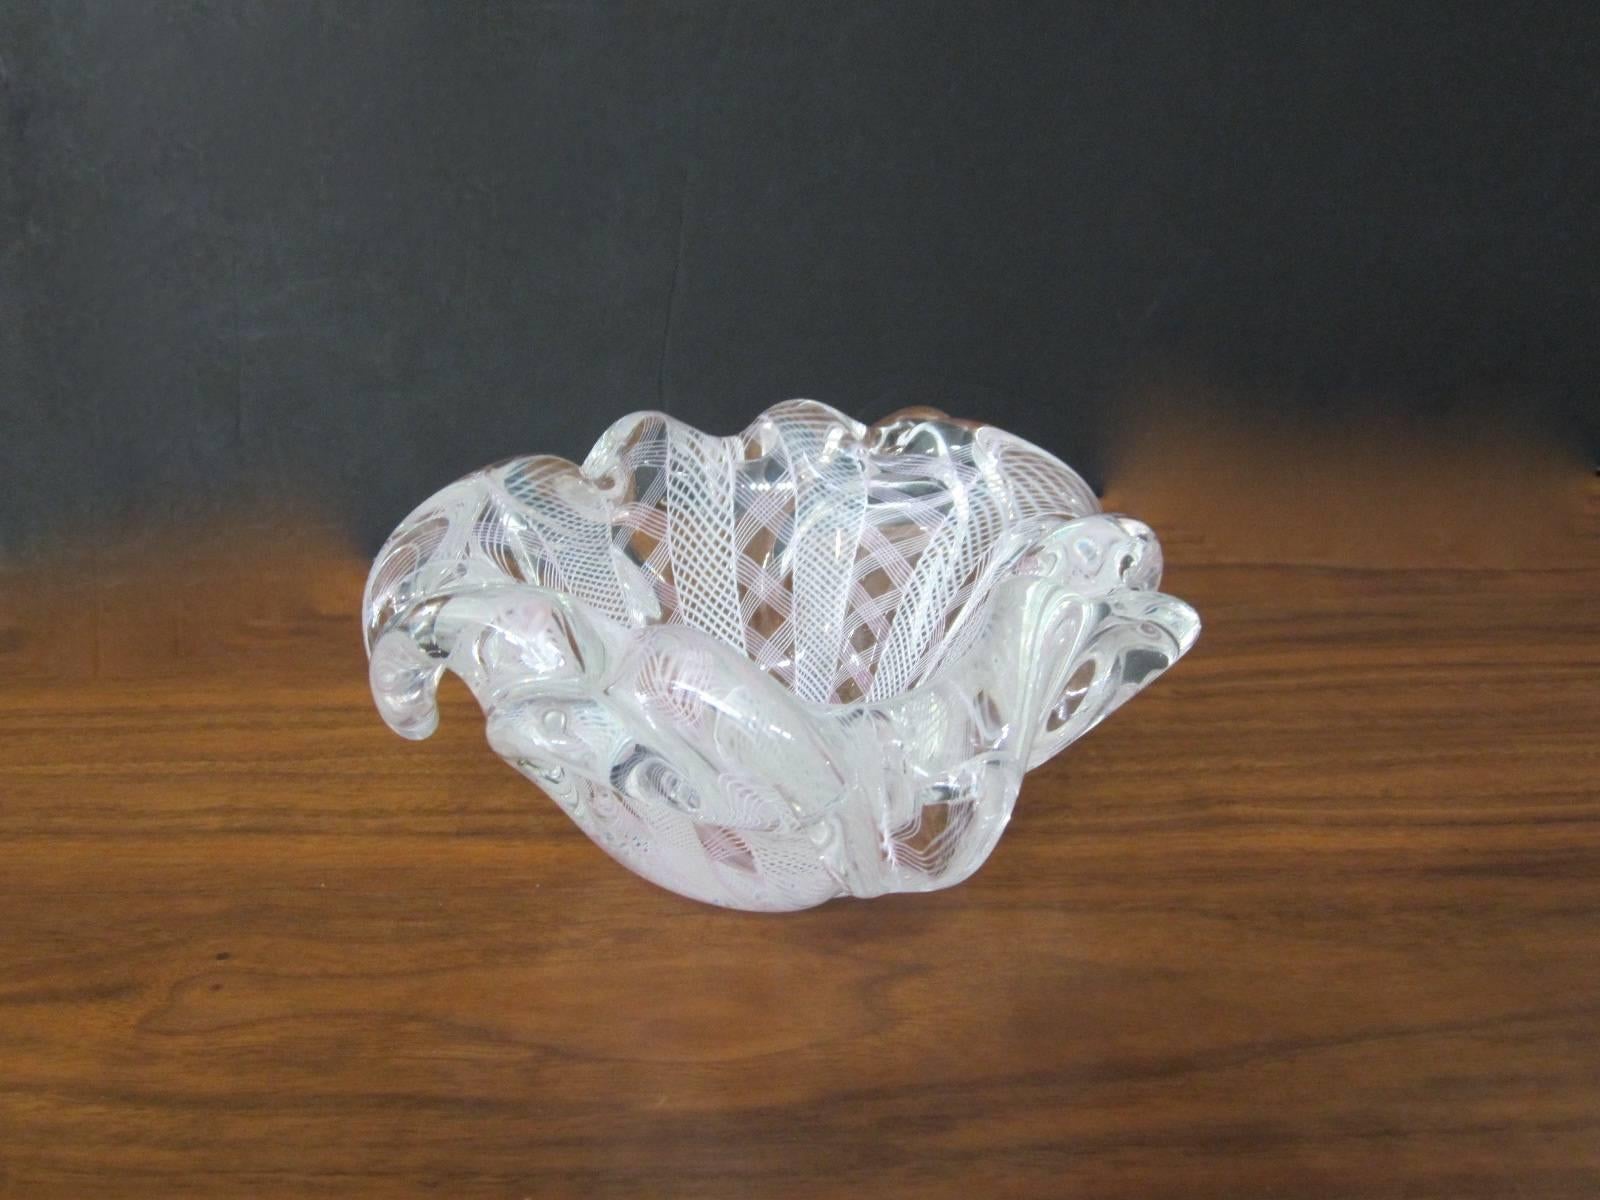 Beautiful handblown Murano glass catchall bowl done using the zanfirico technique which was brought back to use by Antonio Sanquirico in Murano, Venice, Italy.